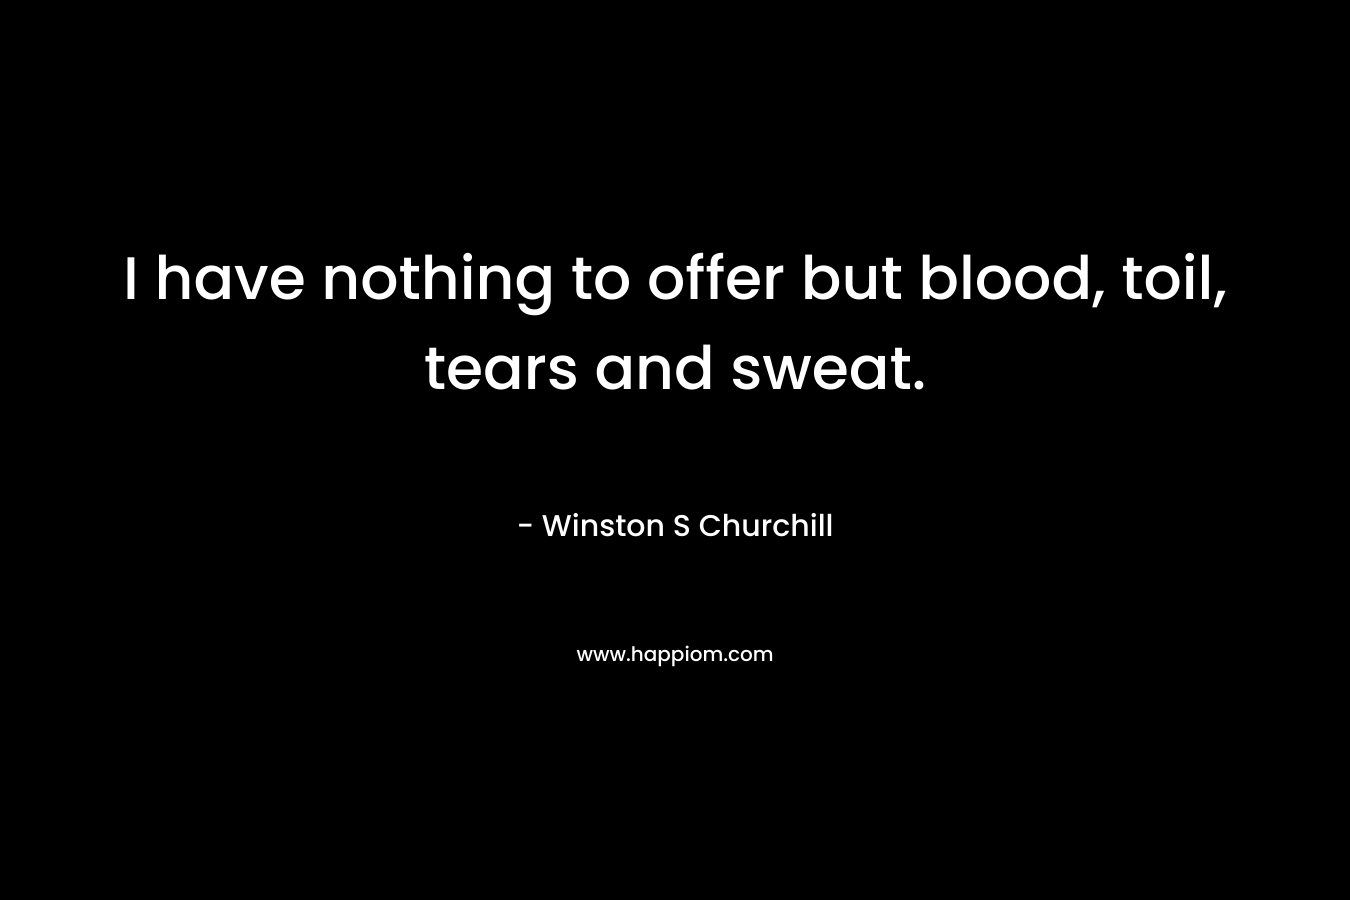 I have nothing to offer but blood, toil, tears and sweat.